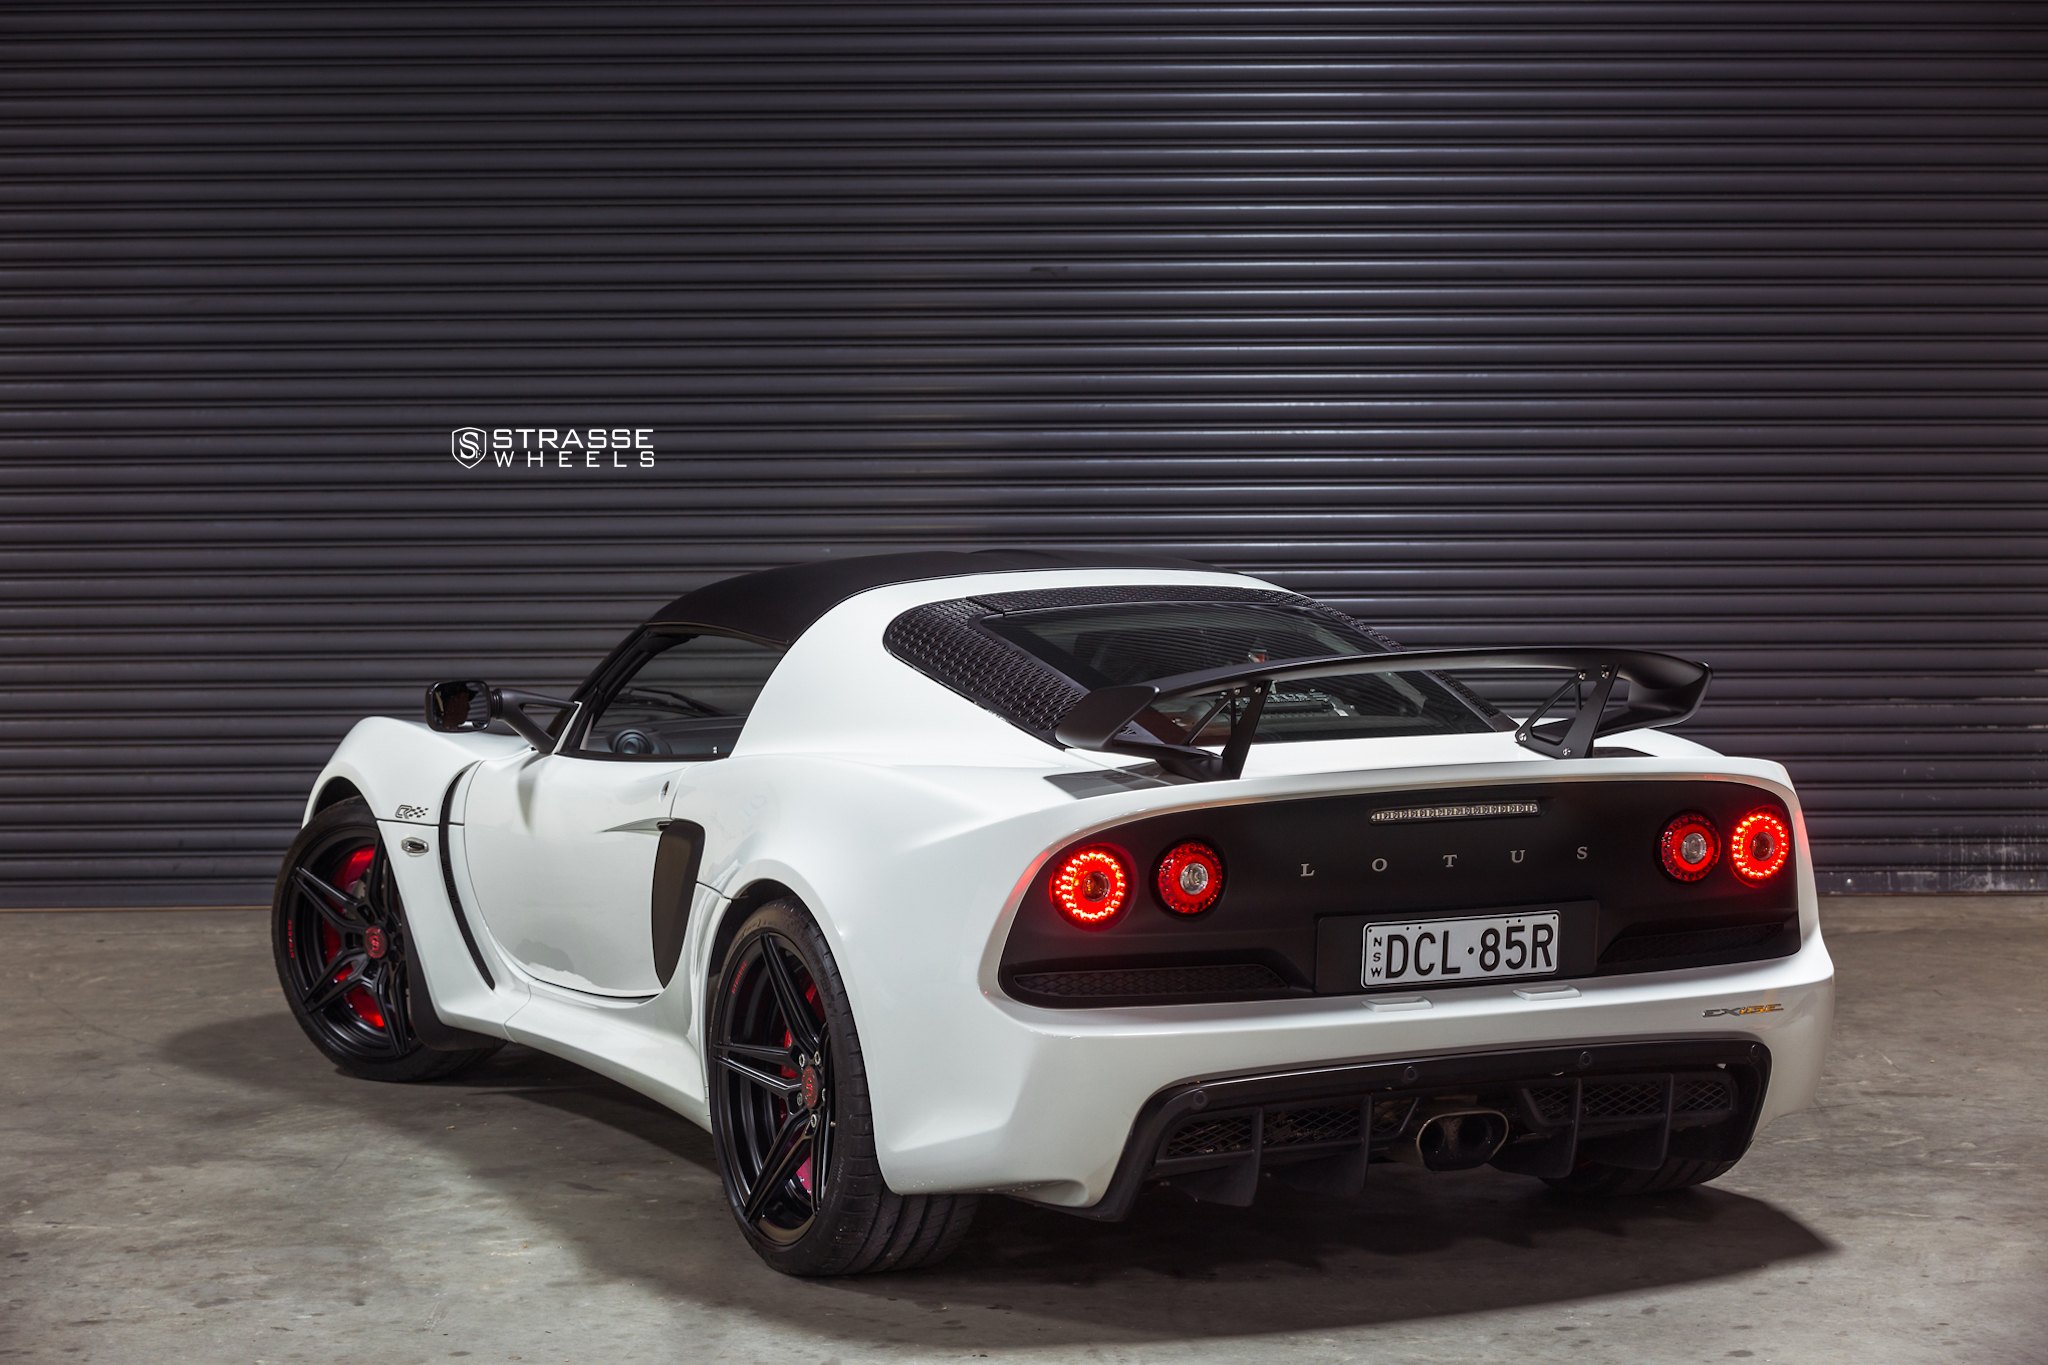 Large Wing Spoiler on White Lotus Exige - Photo by Strasse Forged